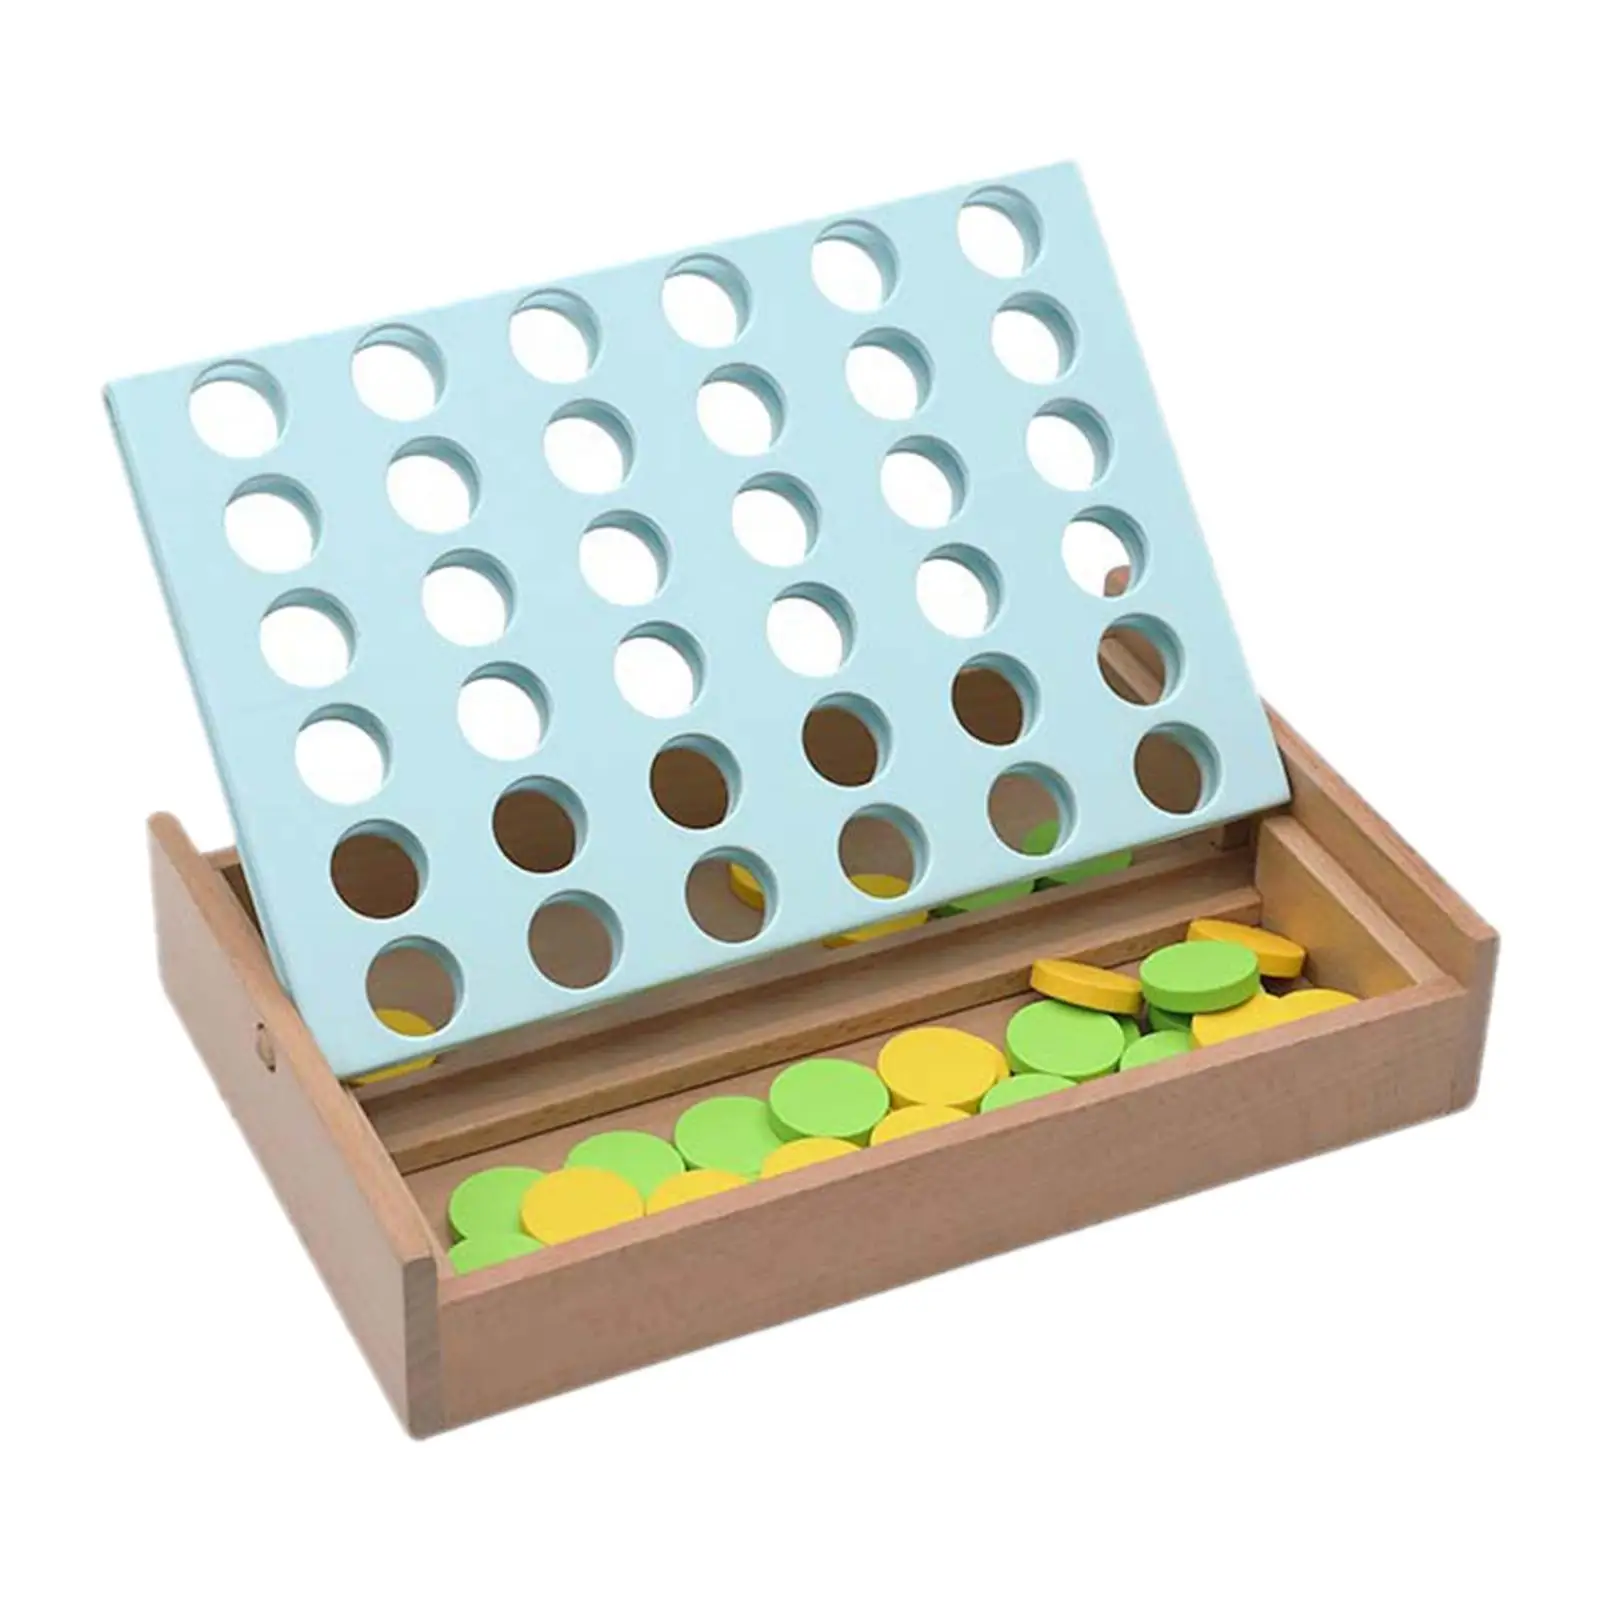 4 in A Row Wooden Board Game Four in A Row Family Board Game Wooden Connect Game for Children 3 Years Old Adults